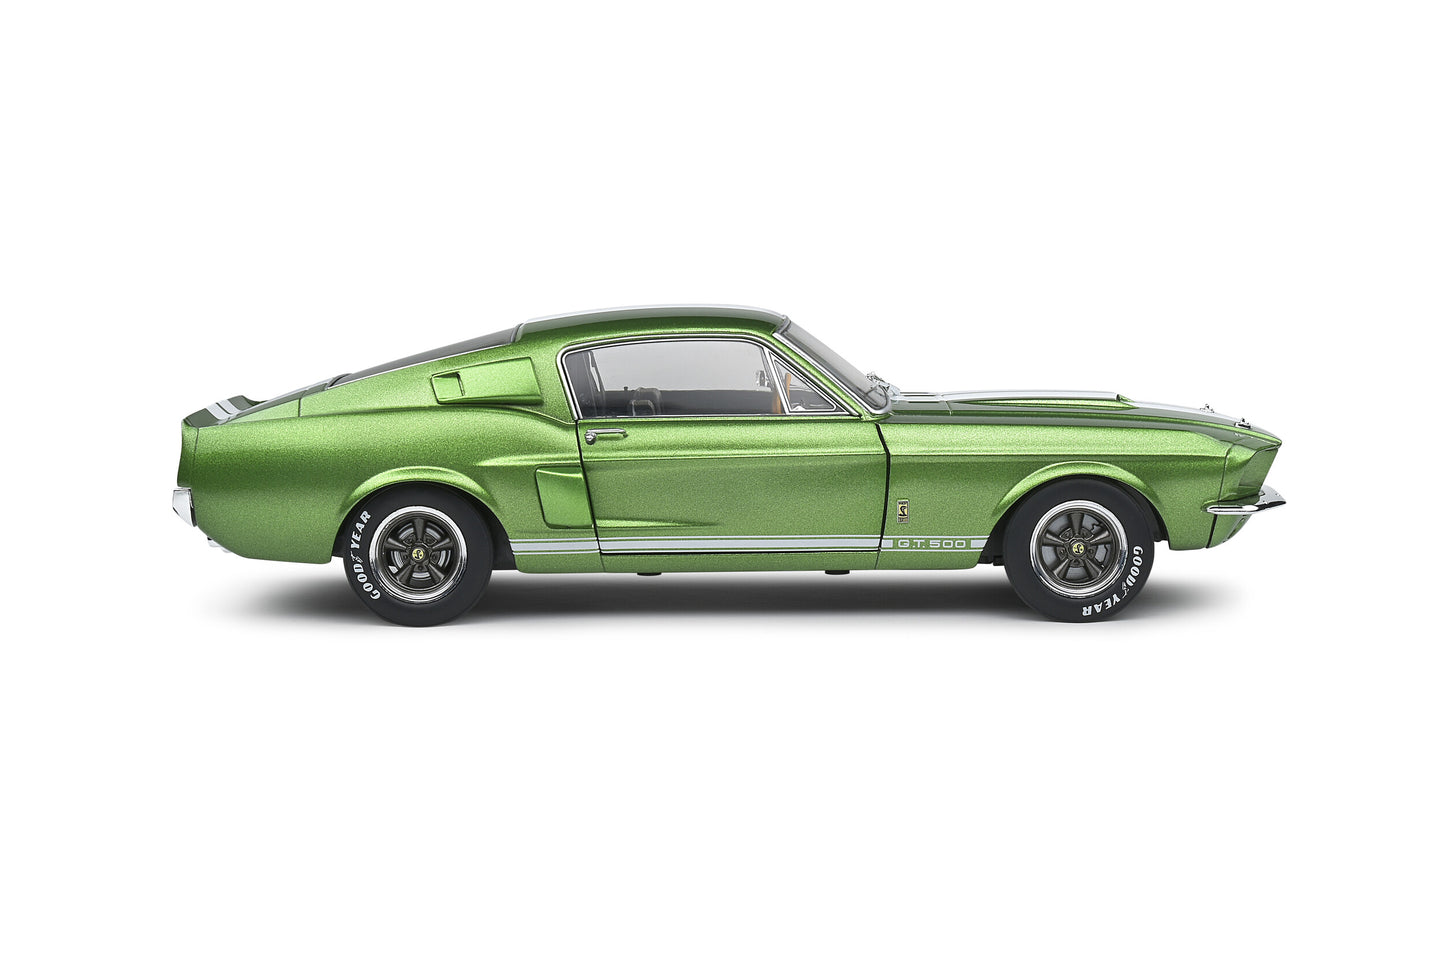 Solido 1967 Ford Shelby Mustang GT500 Lime Green w/ White Stripes 1:18